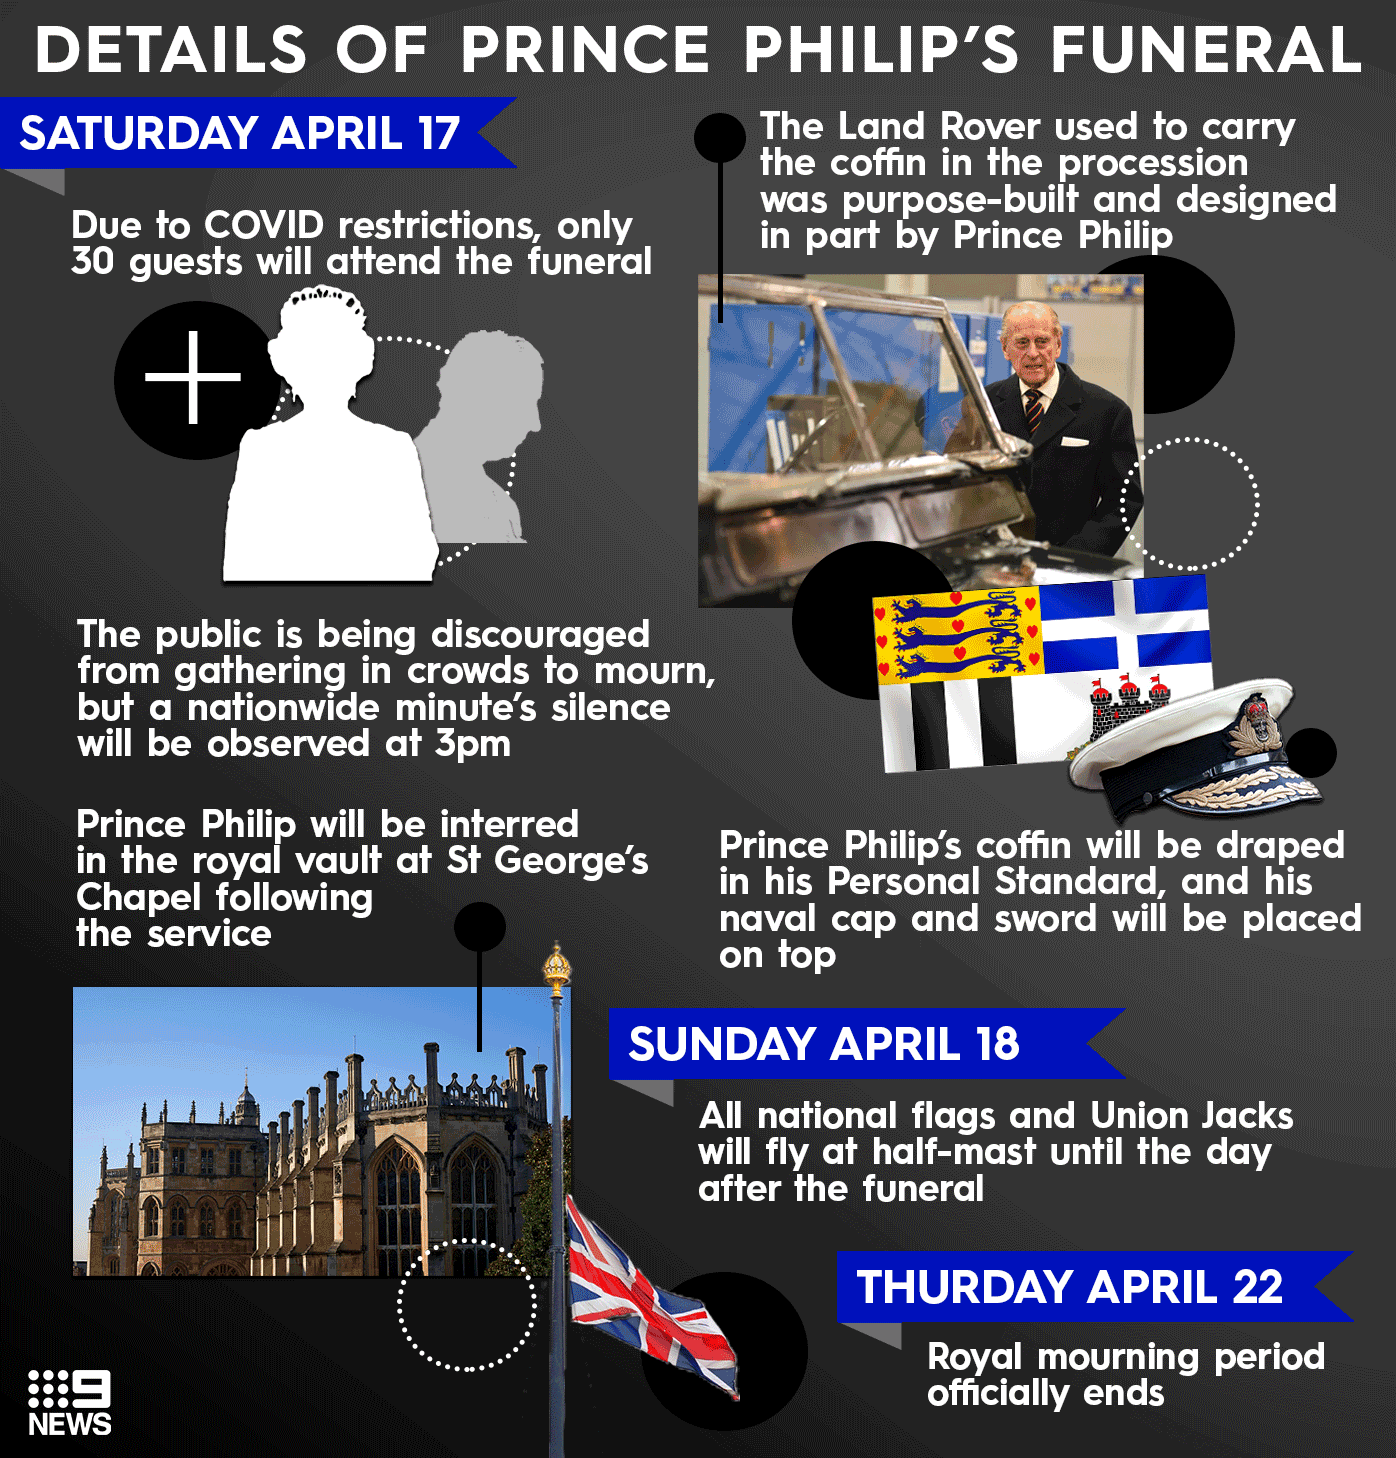 Some details around Prince Philip's funeral have been announced.